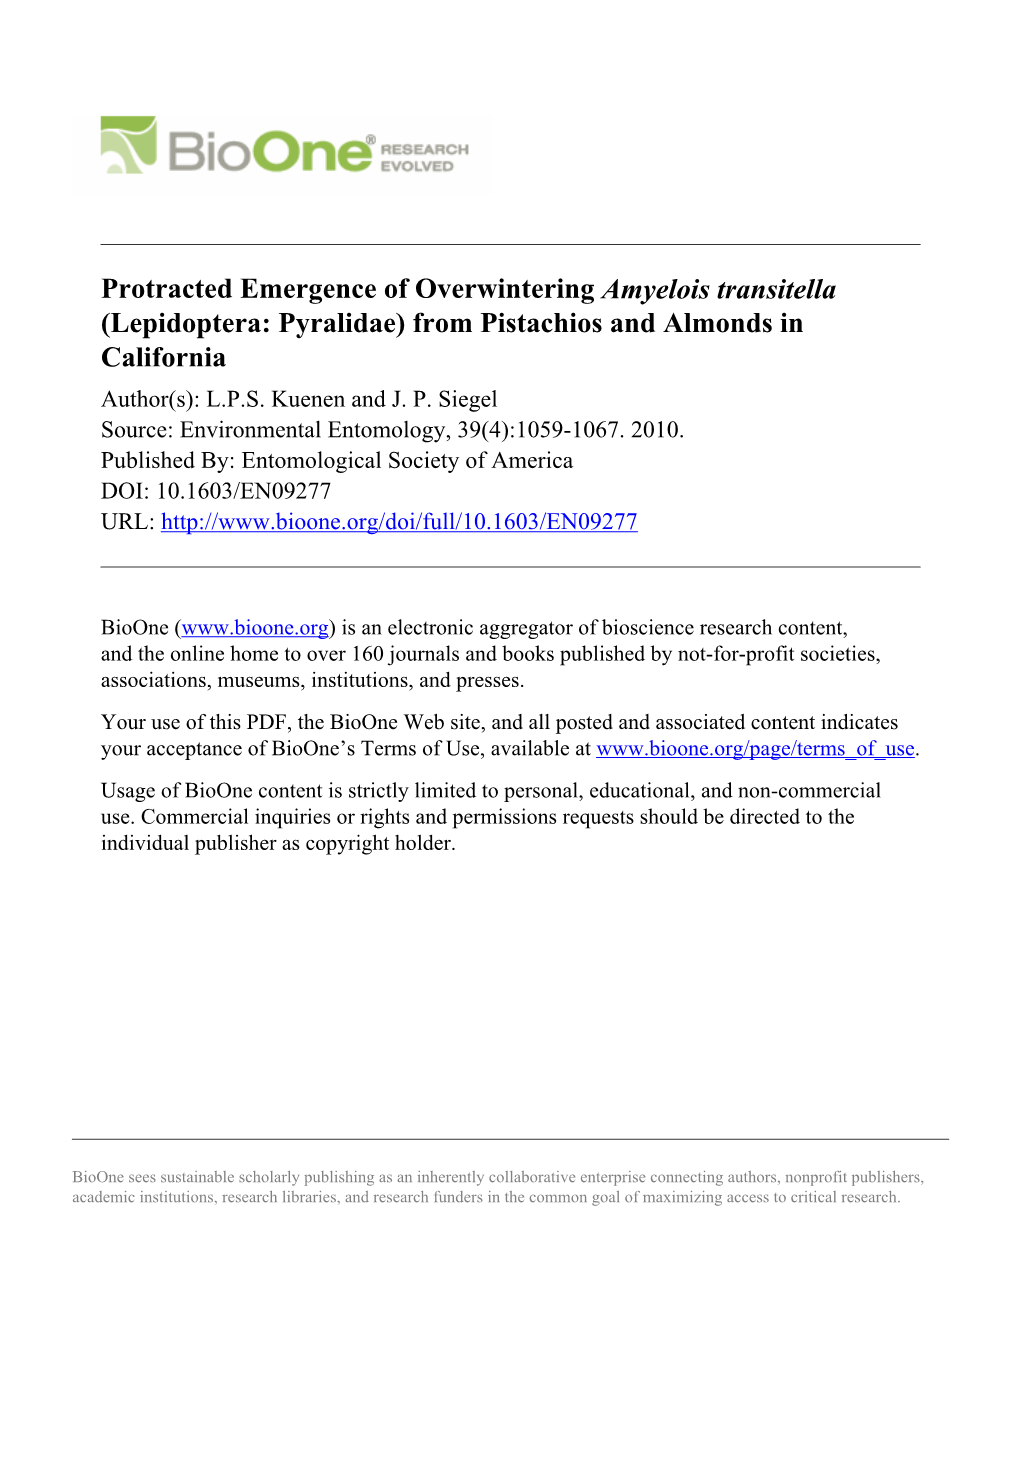 Protracted Emergence of Overwintering Amyelois Transitella (Lepidoptera: Pyralidae) from Pistachios and Almonds in California Author(S): L.P.S